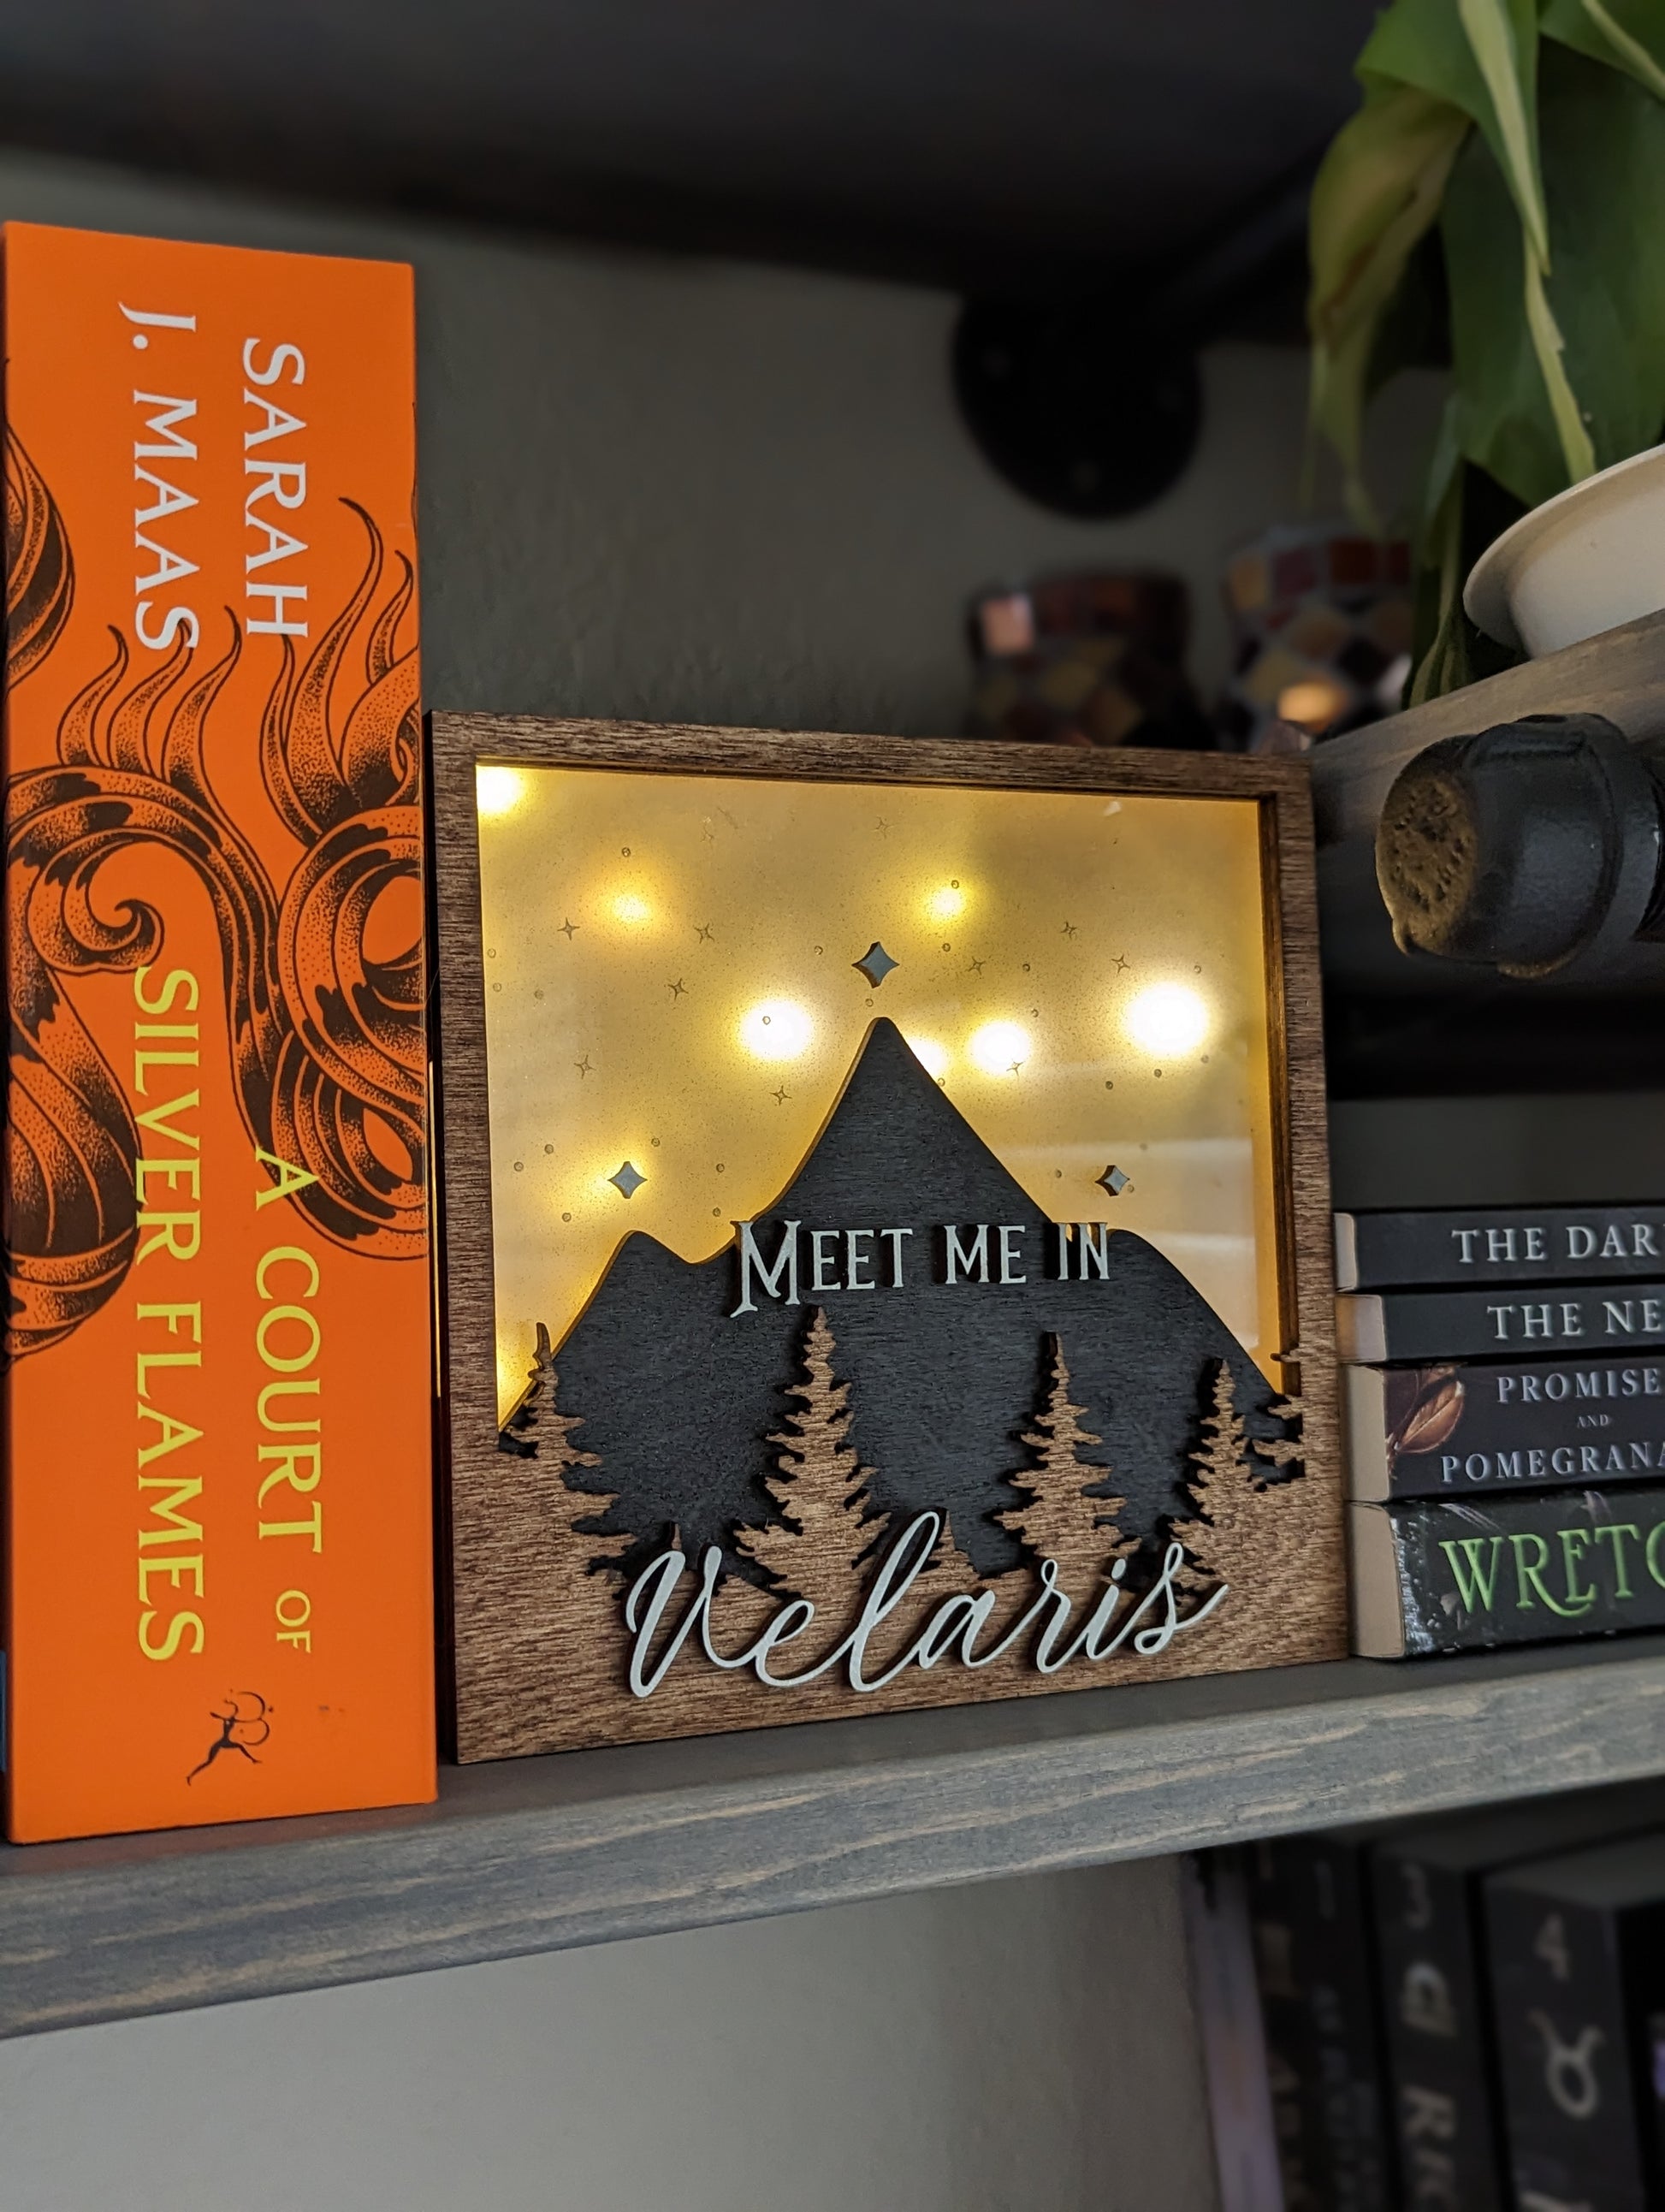 Meet Me In Velaris Officially Licensed ACOTAR Lighted Bookshelf Sign - Quill & Cauldron